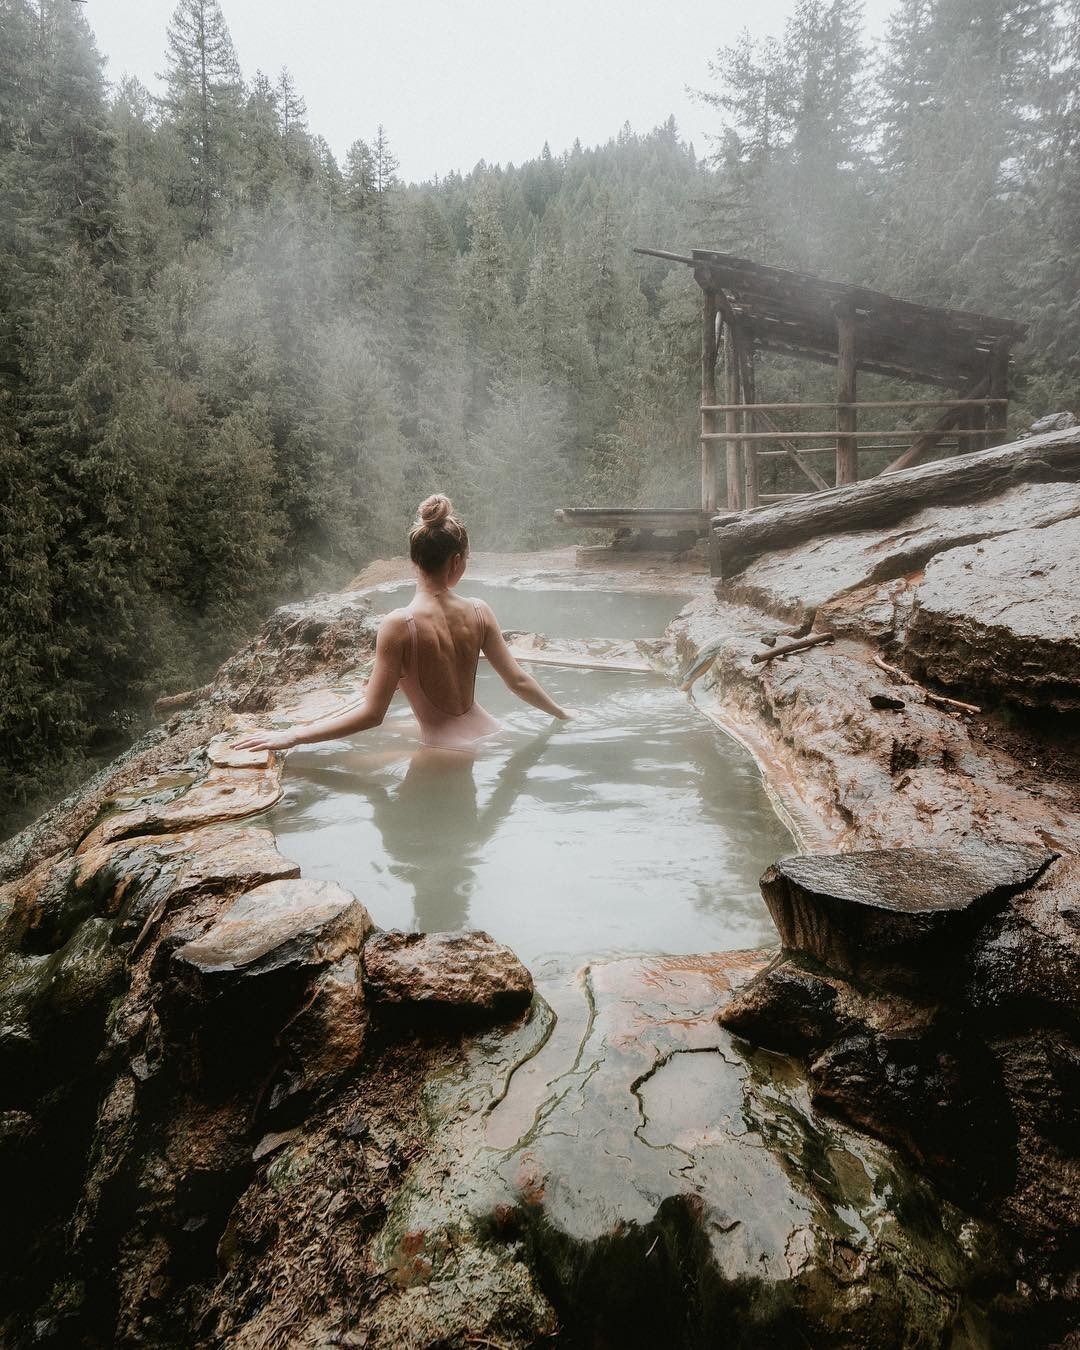 Photo by Bugger099 with the username @Bugger099,  December 18, 2018 at 4:33 AM and the text says 'pir-ado:


x vintage blog x

 #mountains  #girl  #babe  #hot  #spring  #outside  #camp  #travel  #hike  #man'